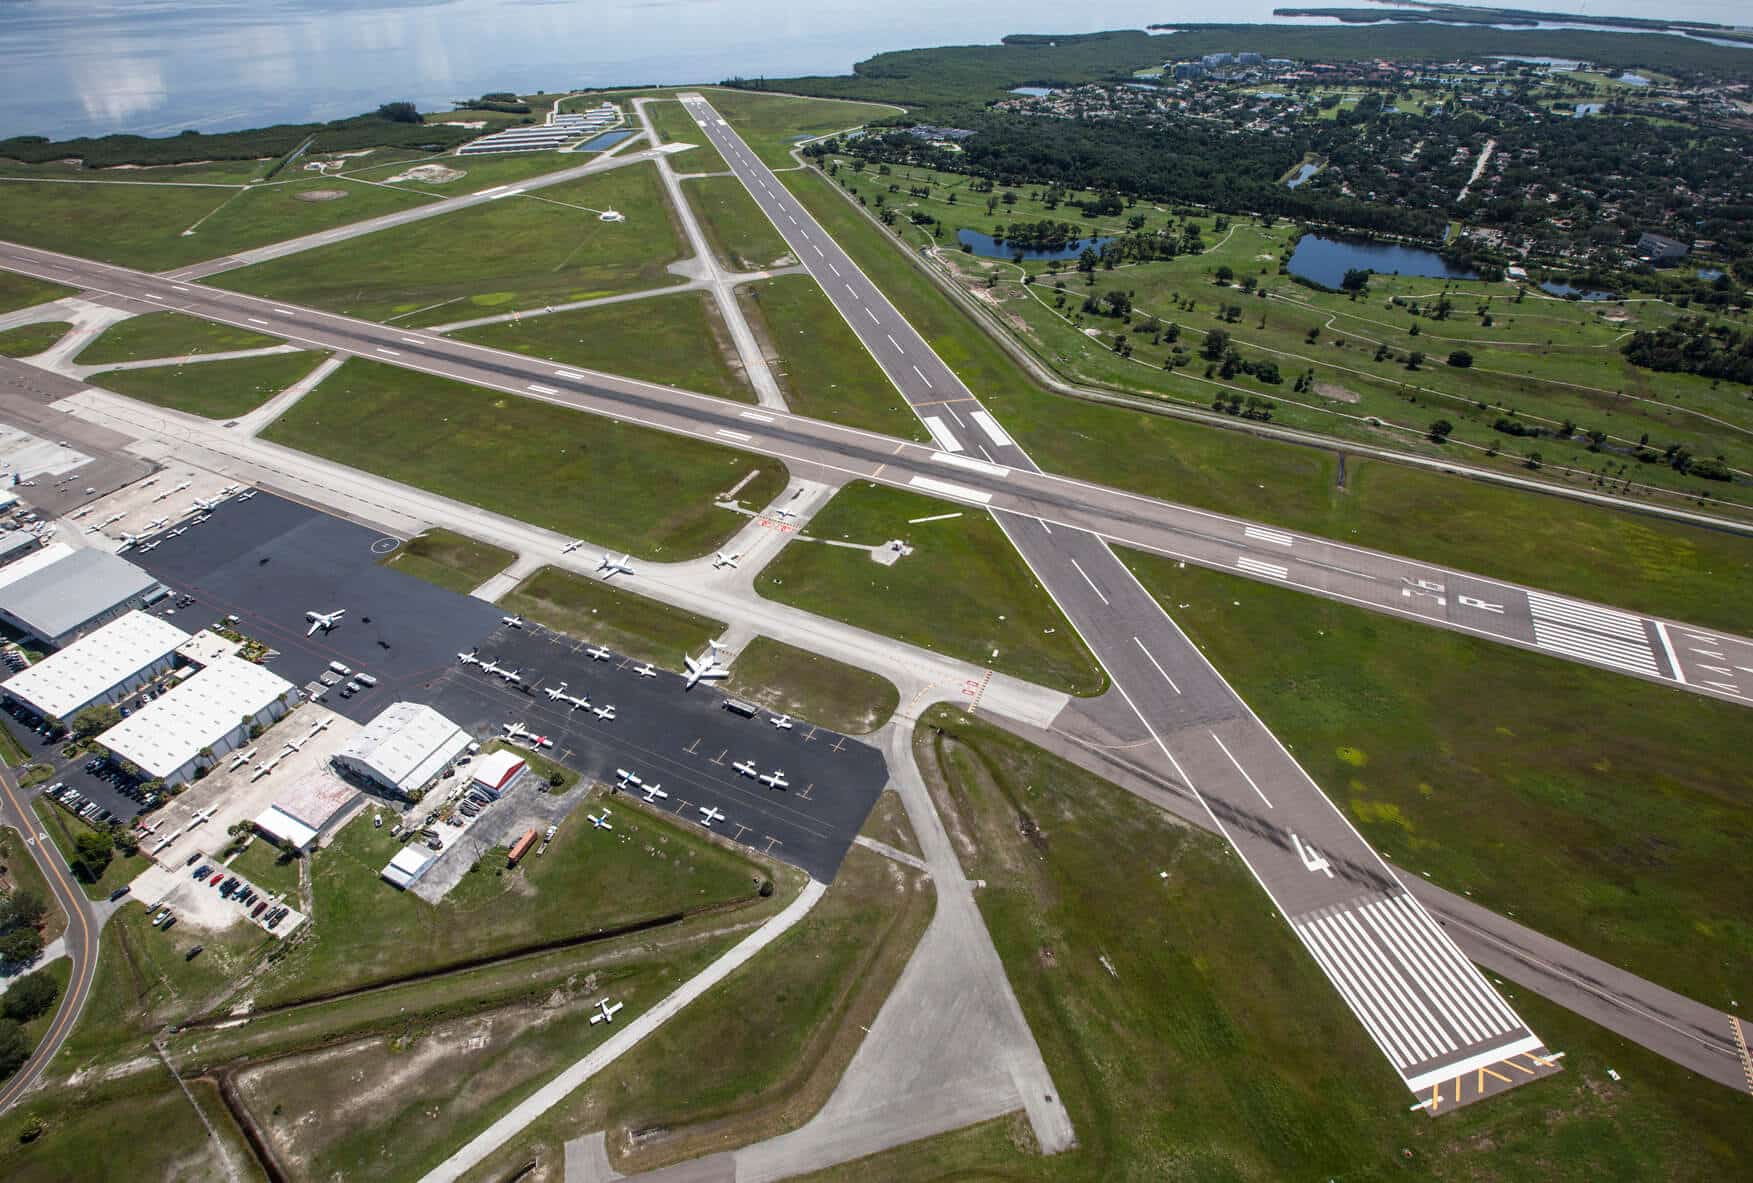 Two intersecting rehabilitated runways at the St/ Petersburg Airport